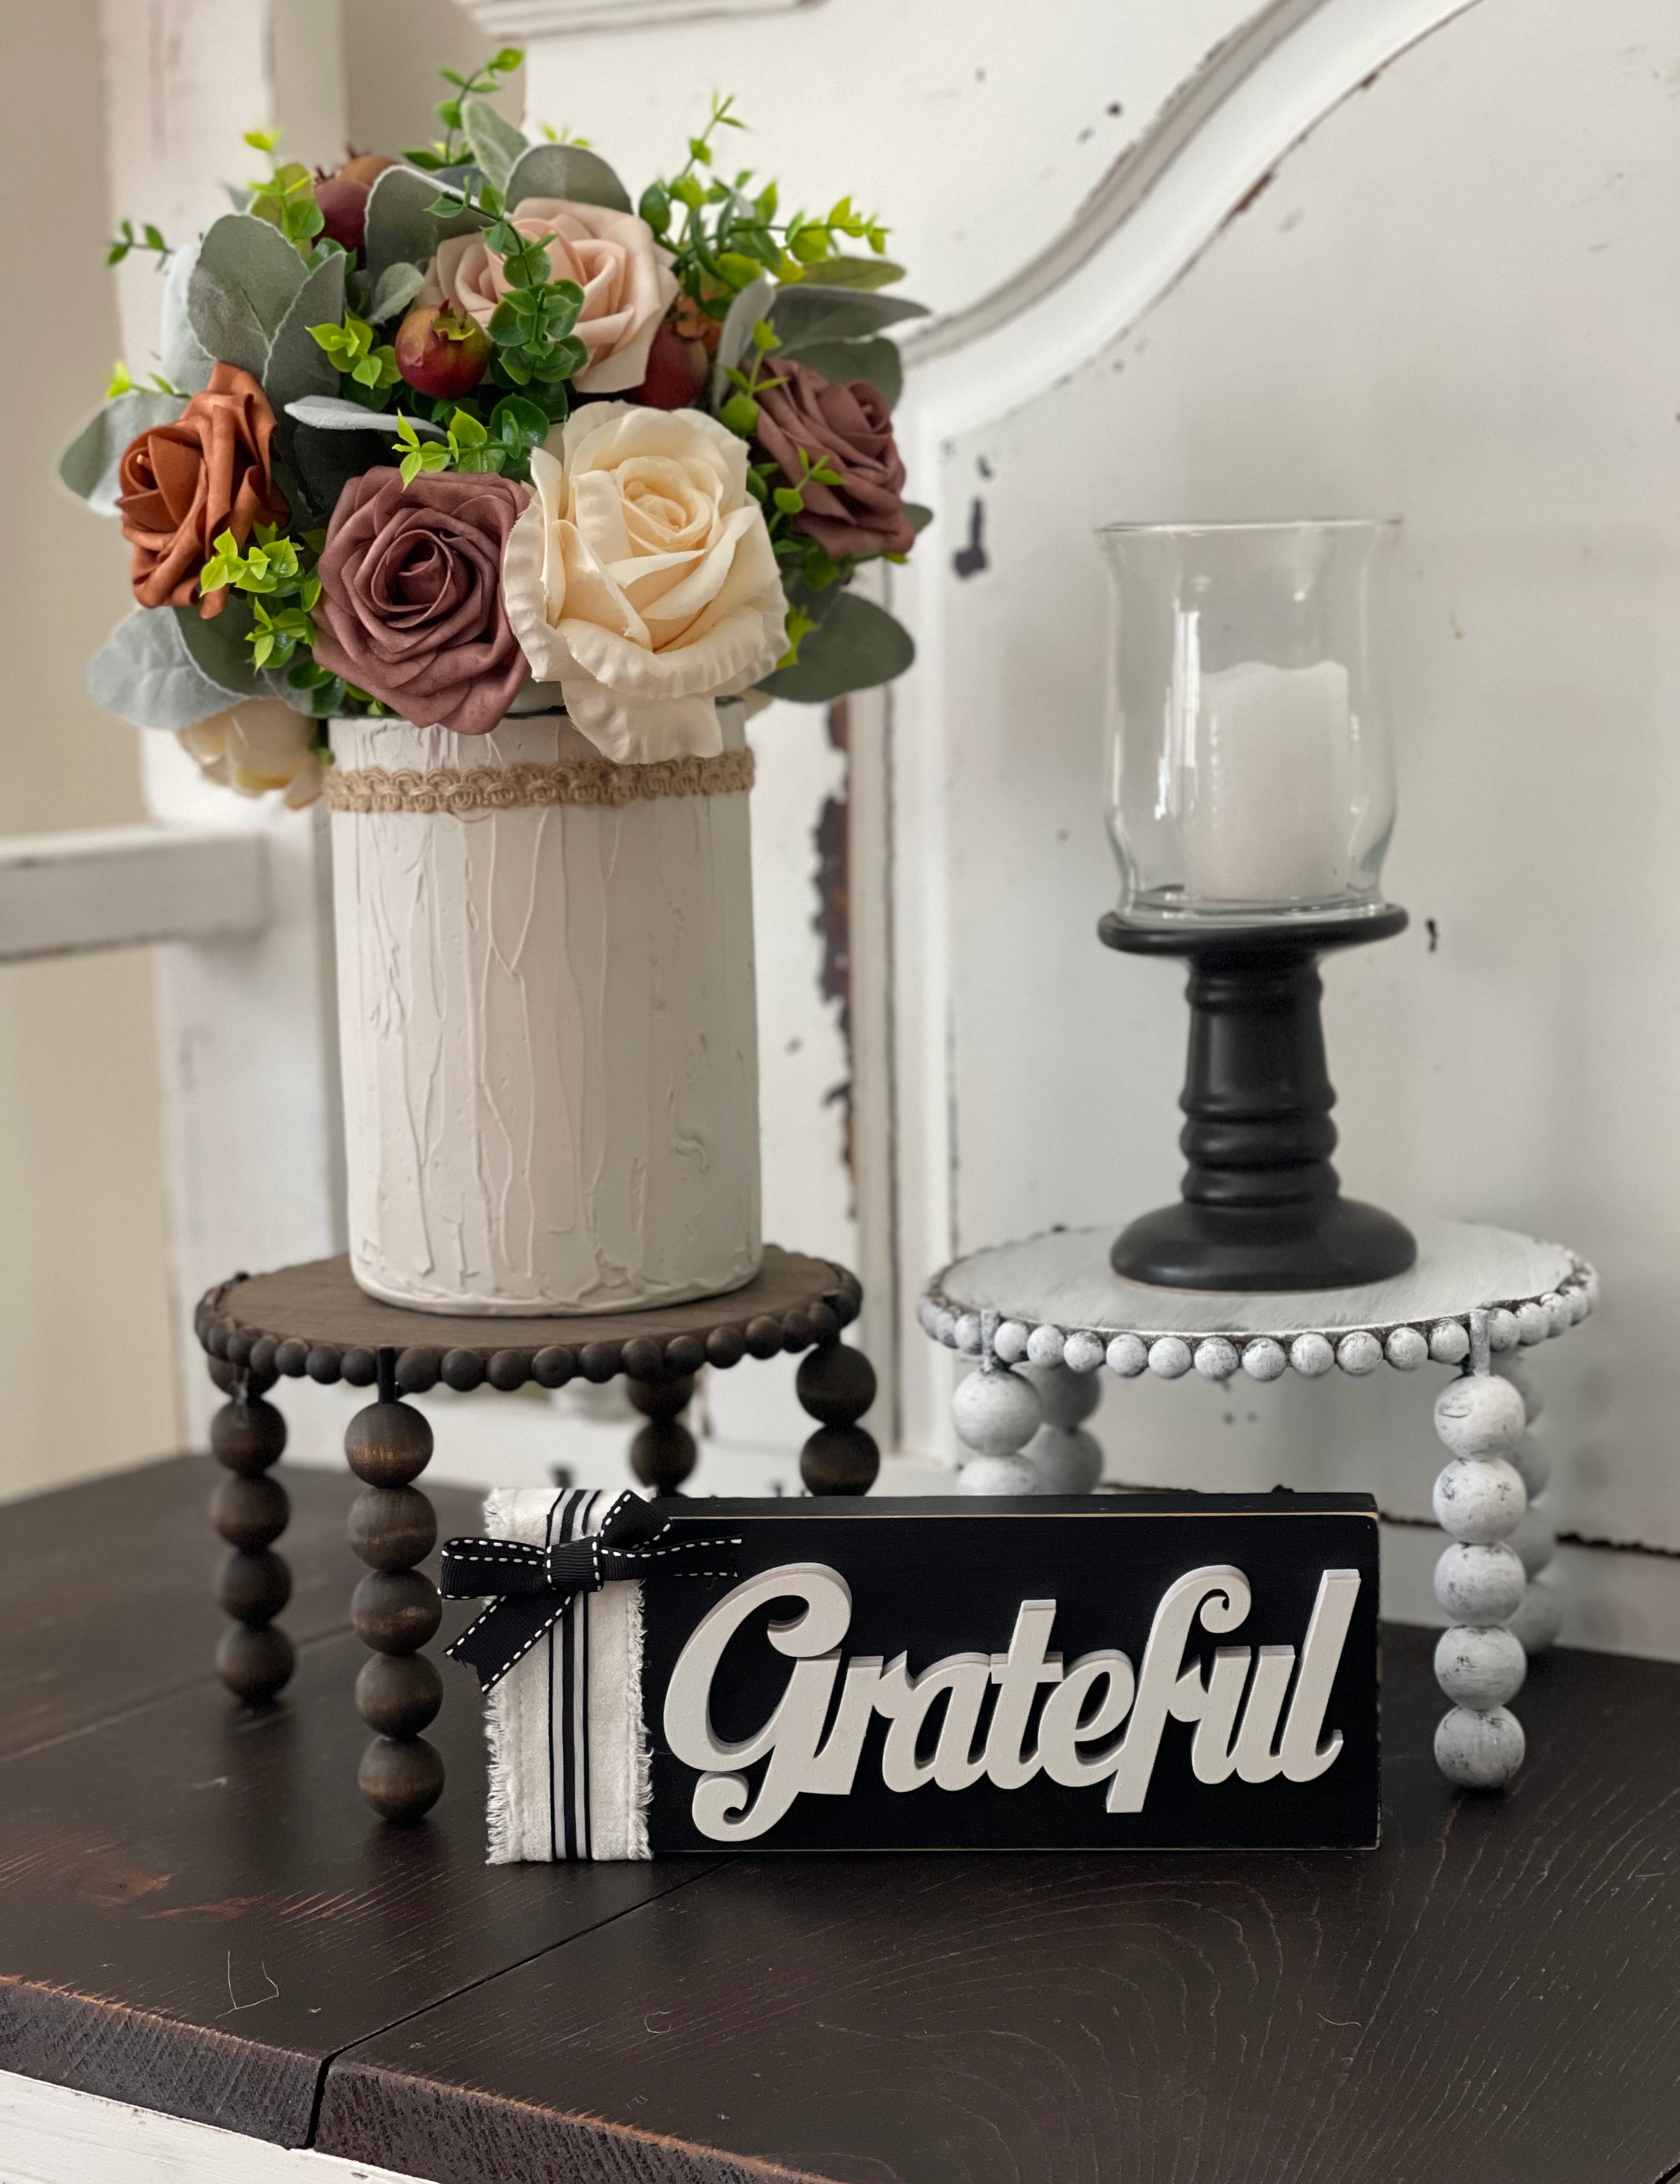 This image shows the paired Jacobean and distressed white risers on a bench with a floral arrangement, candle and a grateful sign. Each item sold separately.